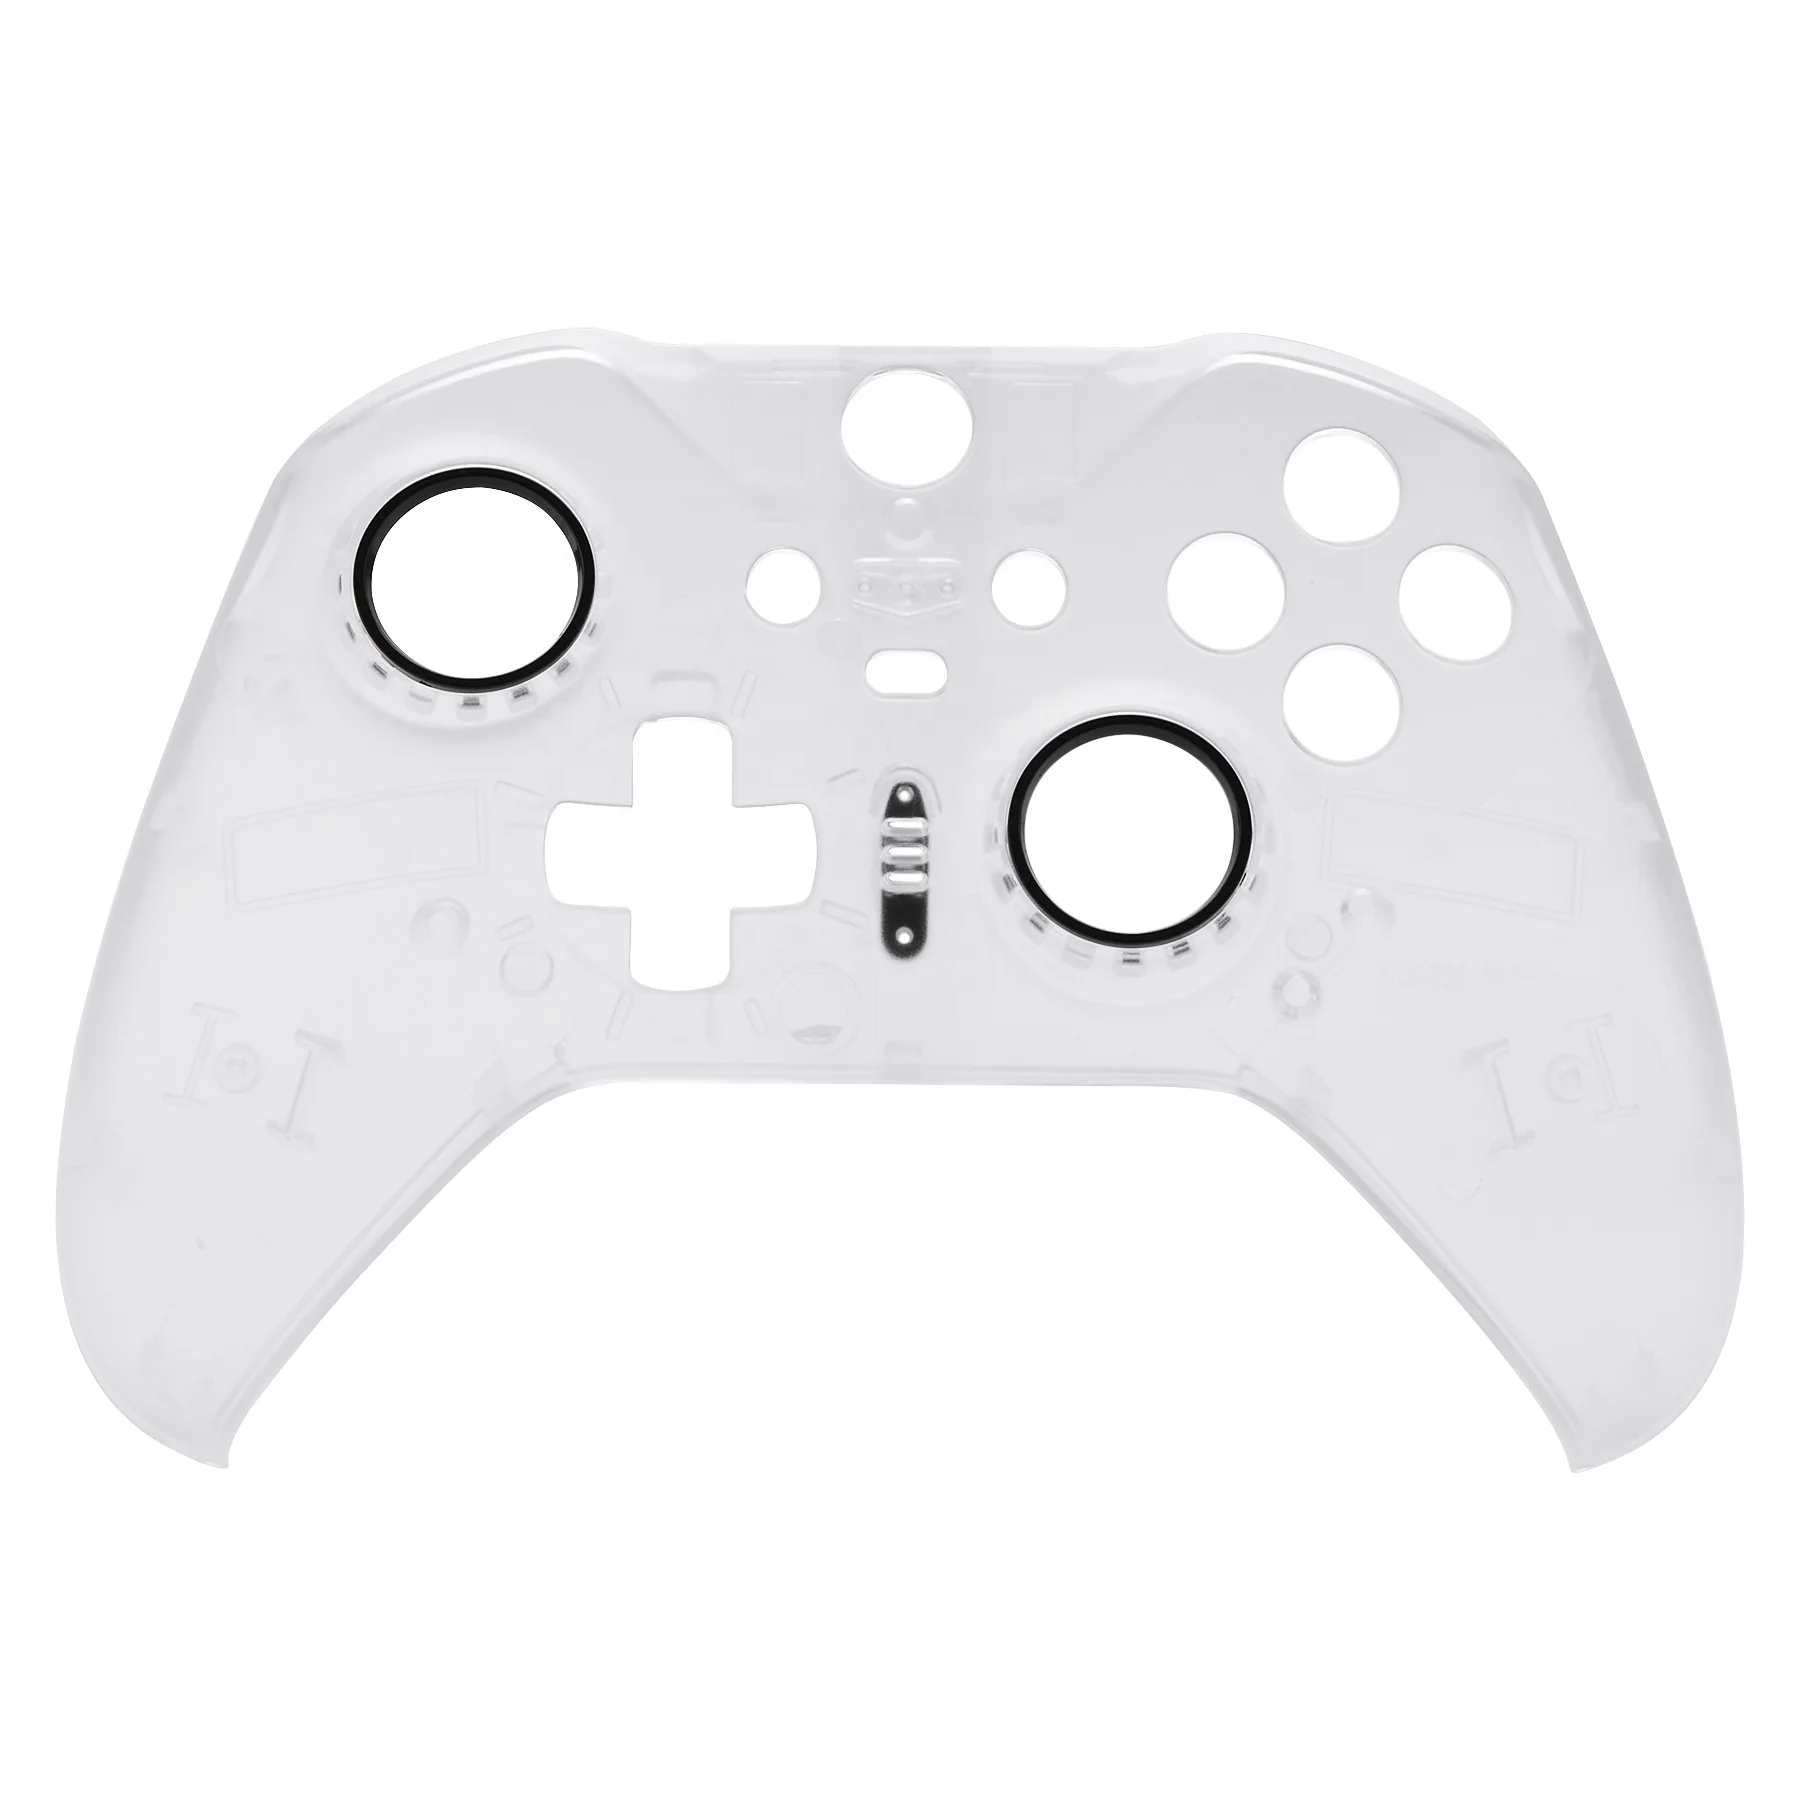 

Wholesale Translucent Clear Gamepad Accessories Faceplate Housing Cover Case Shell For Xbox One For Elite Series 2 Controller